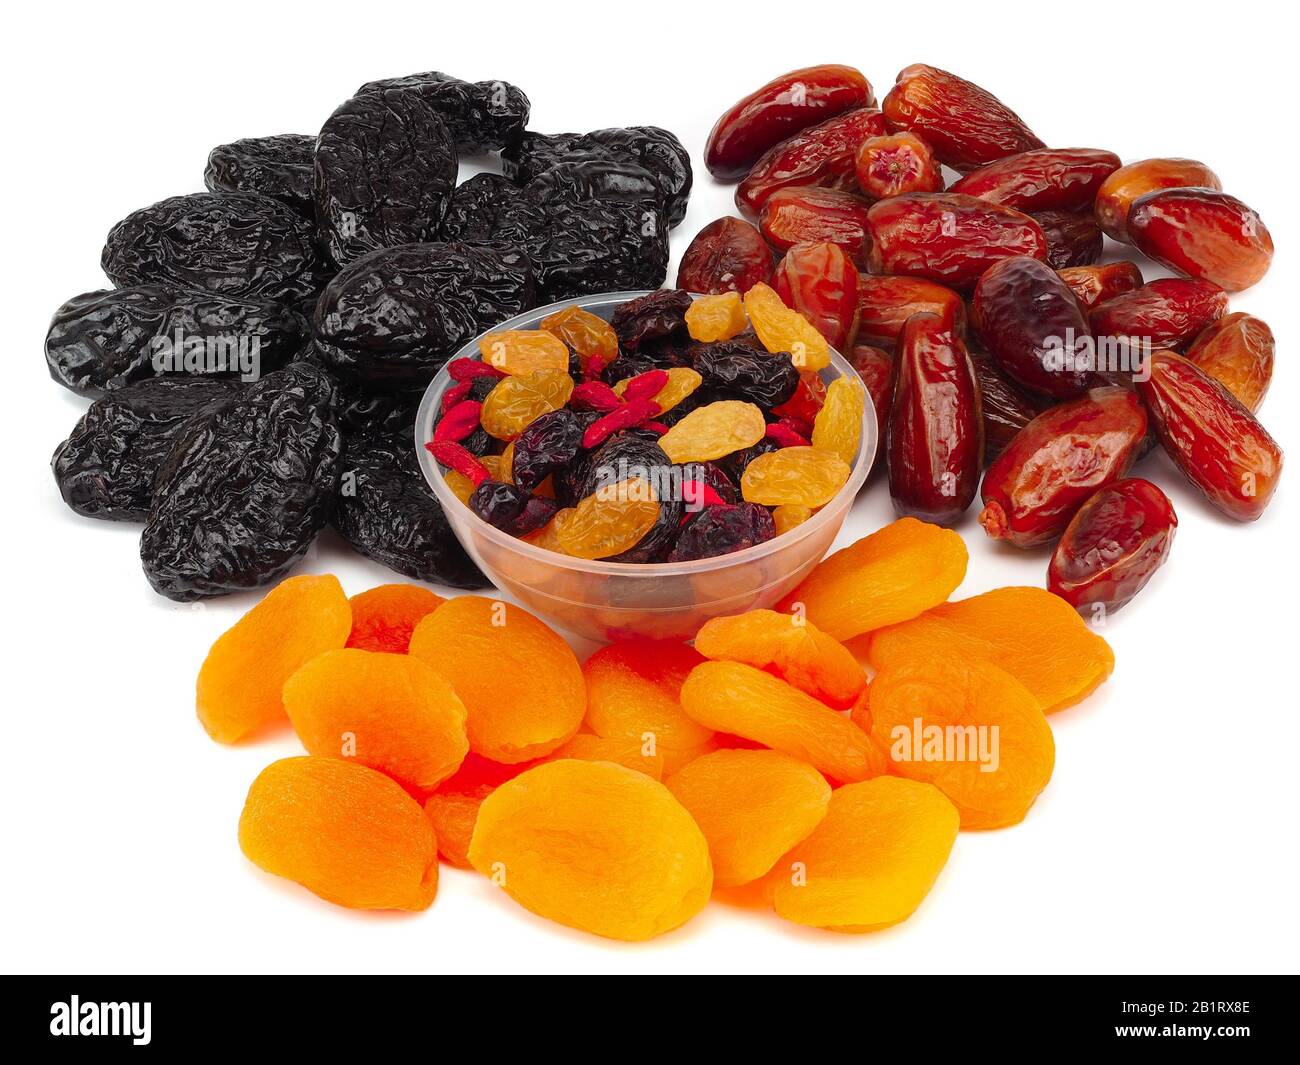 Mixed dried fruit Stock Photo